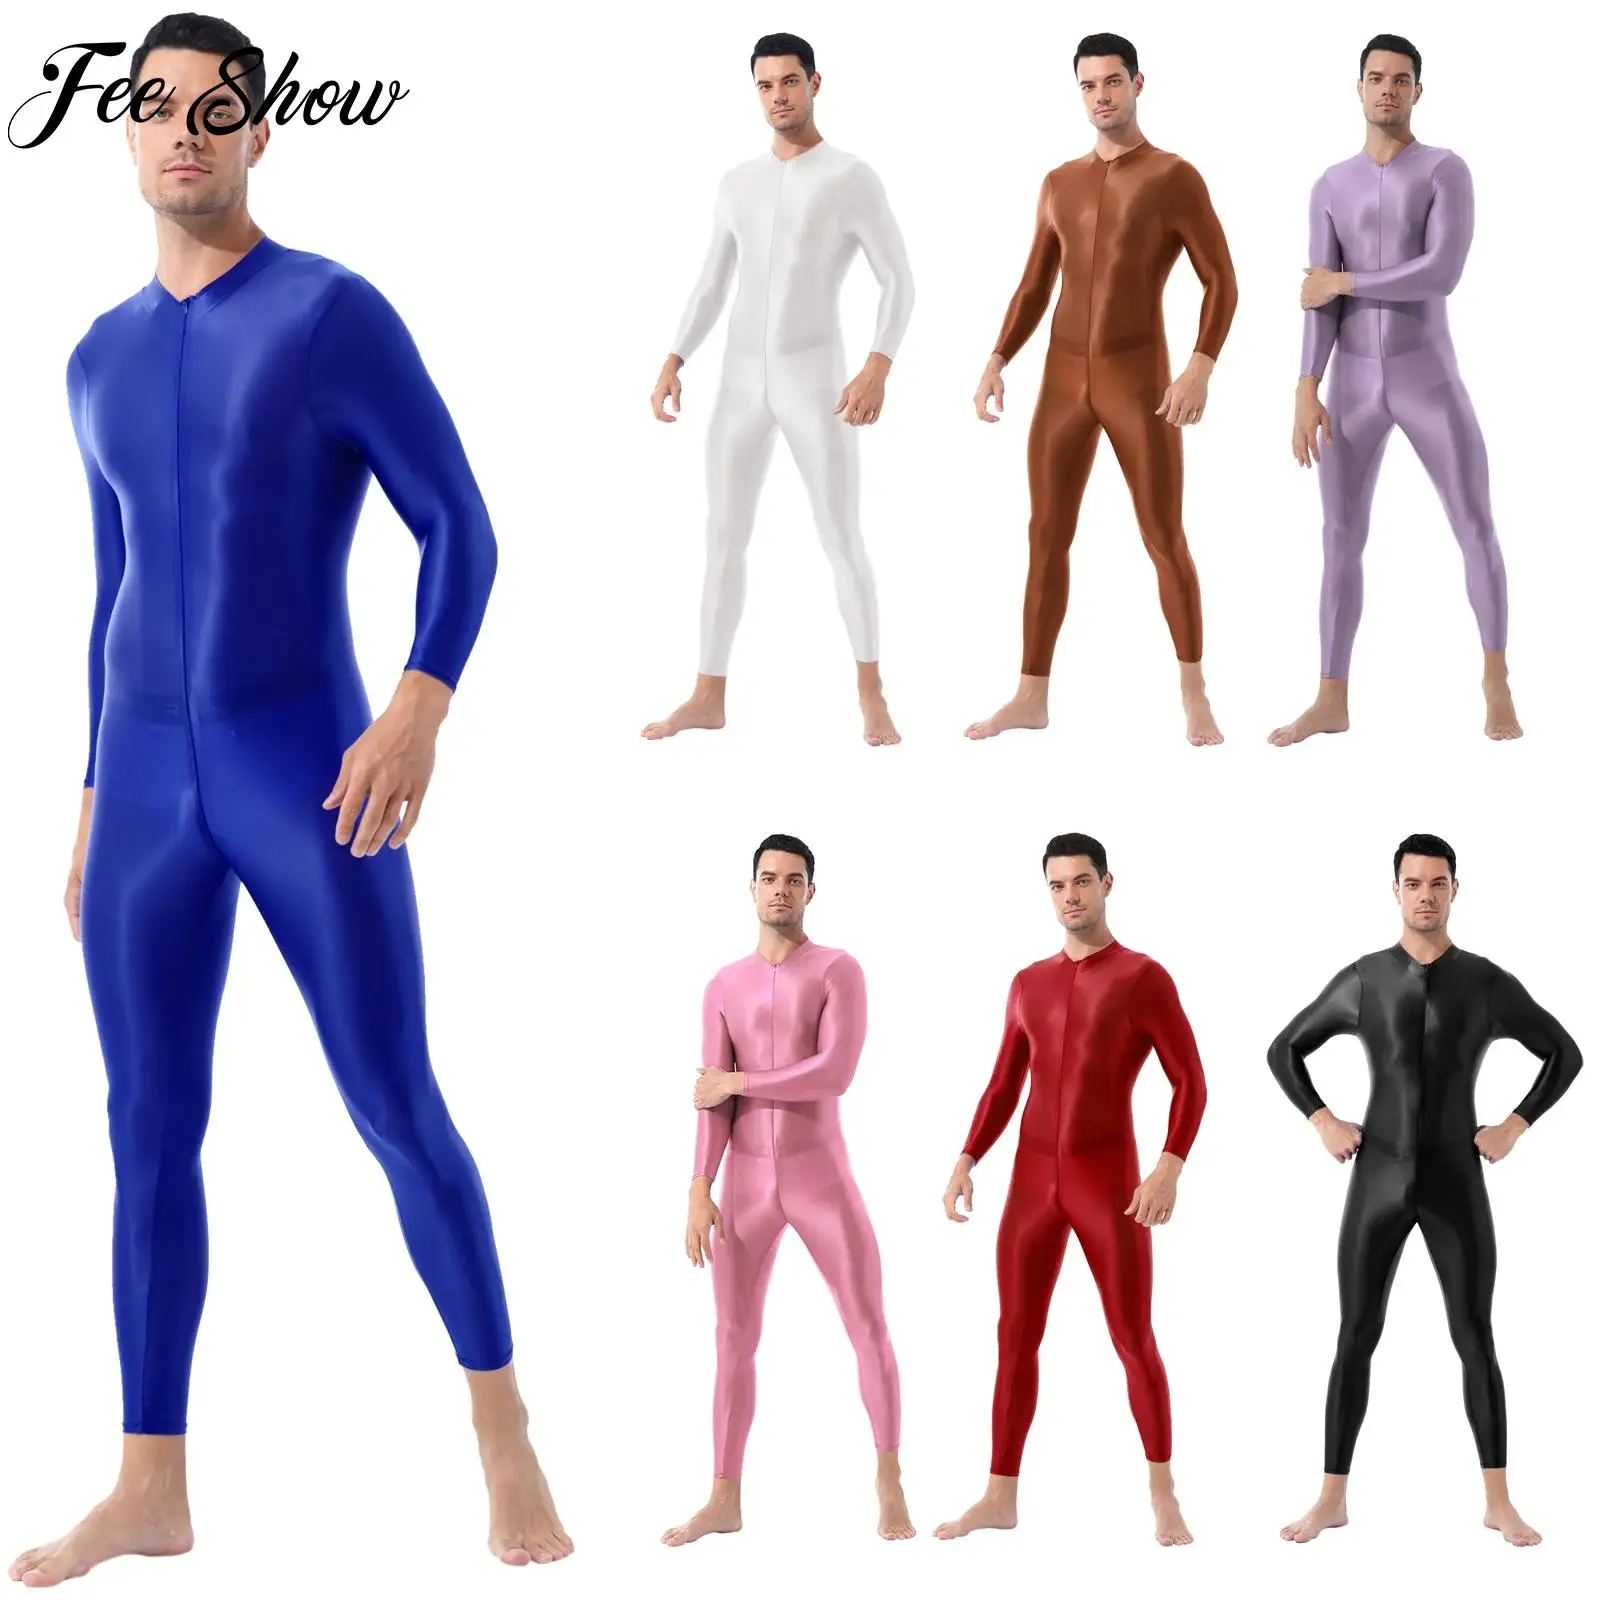 

Mens Smooth Lingerie Bodysuit Long Sleeves Zipper Leotard Clubwear Club Costume Rave Party Workout Fitness Gymnastics Jumpsuit